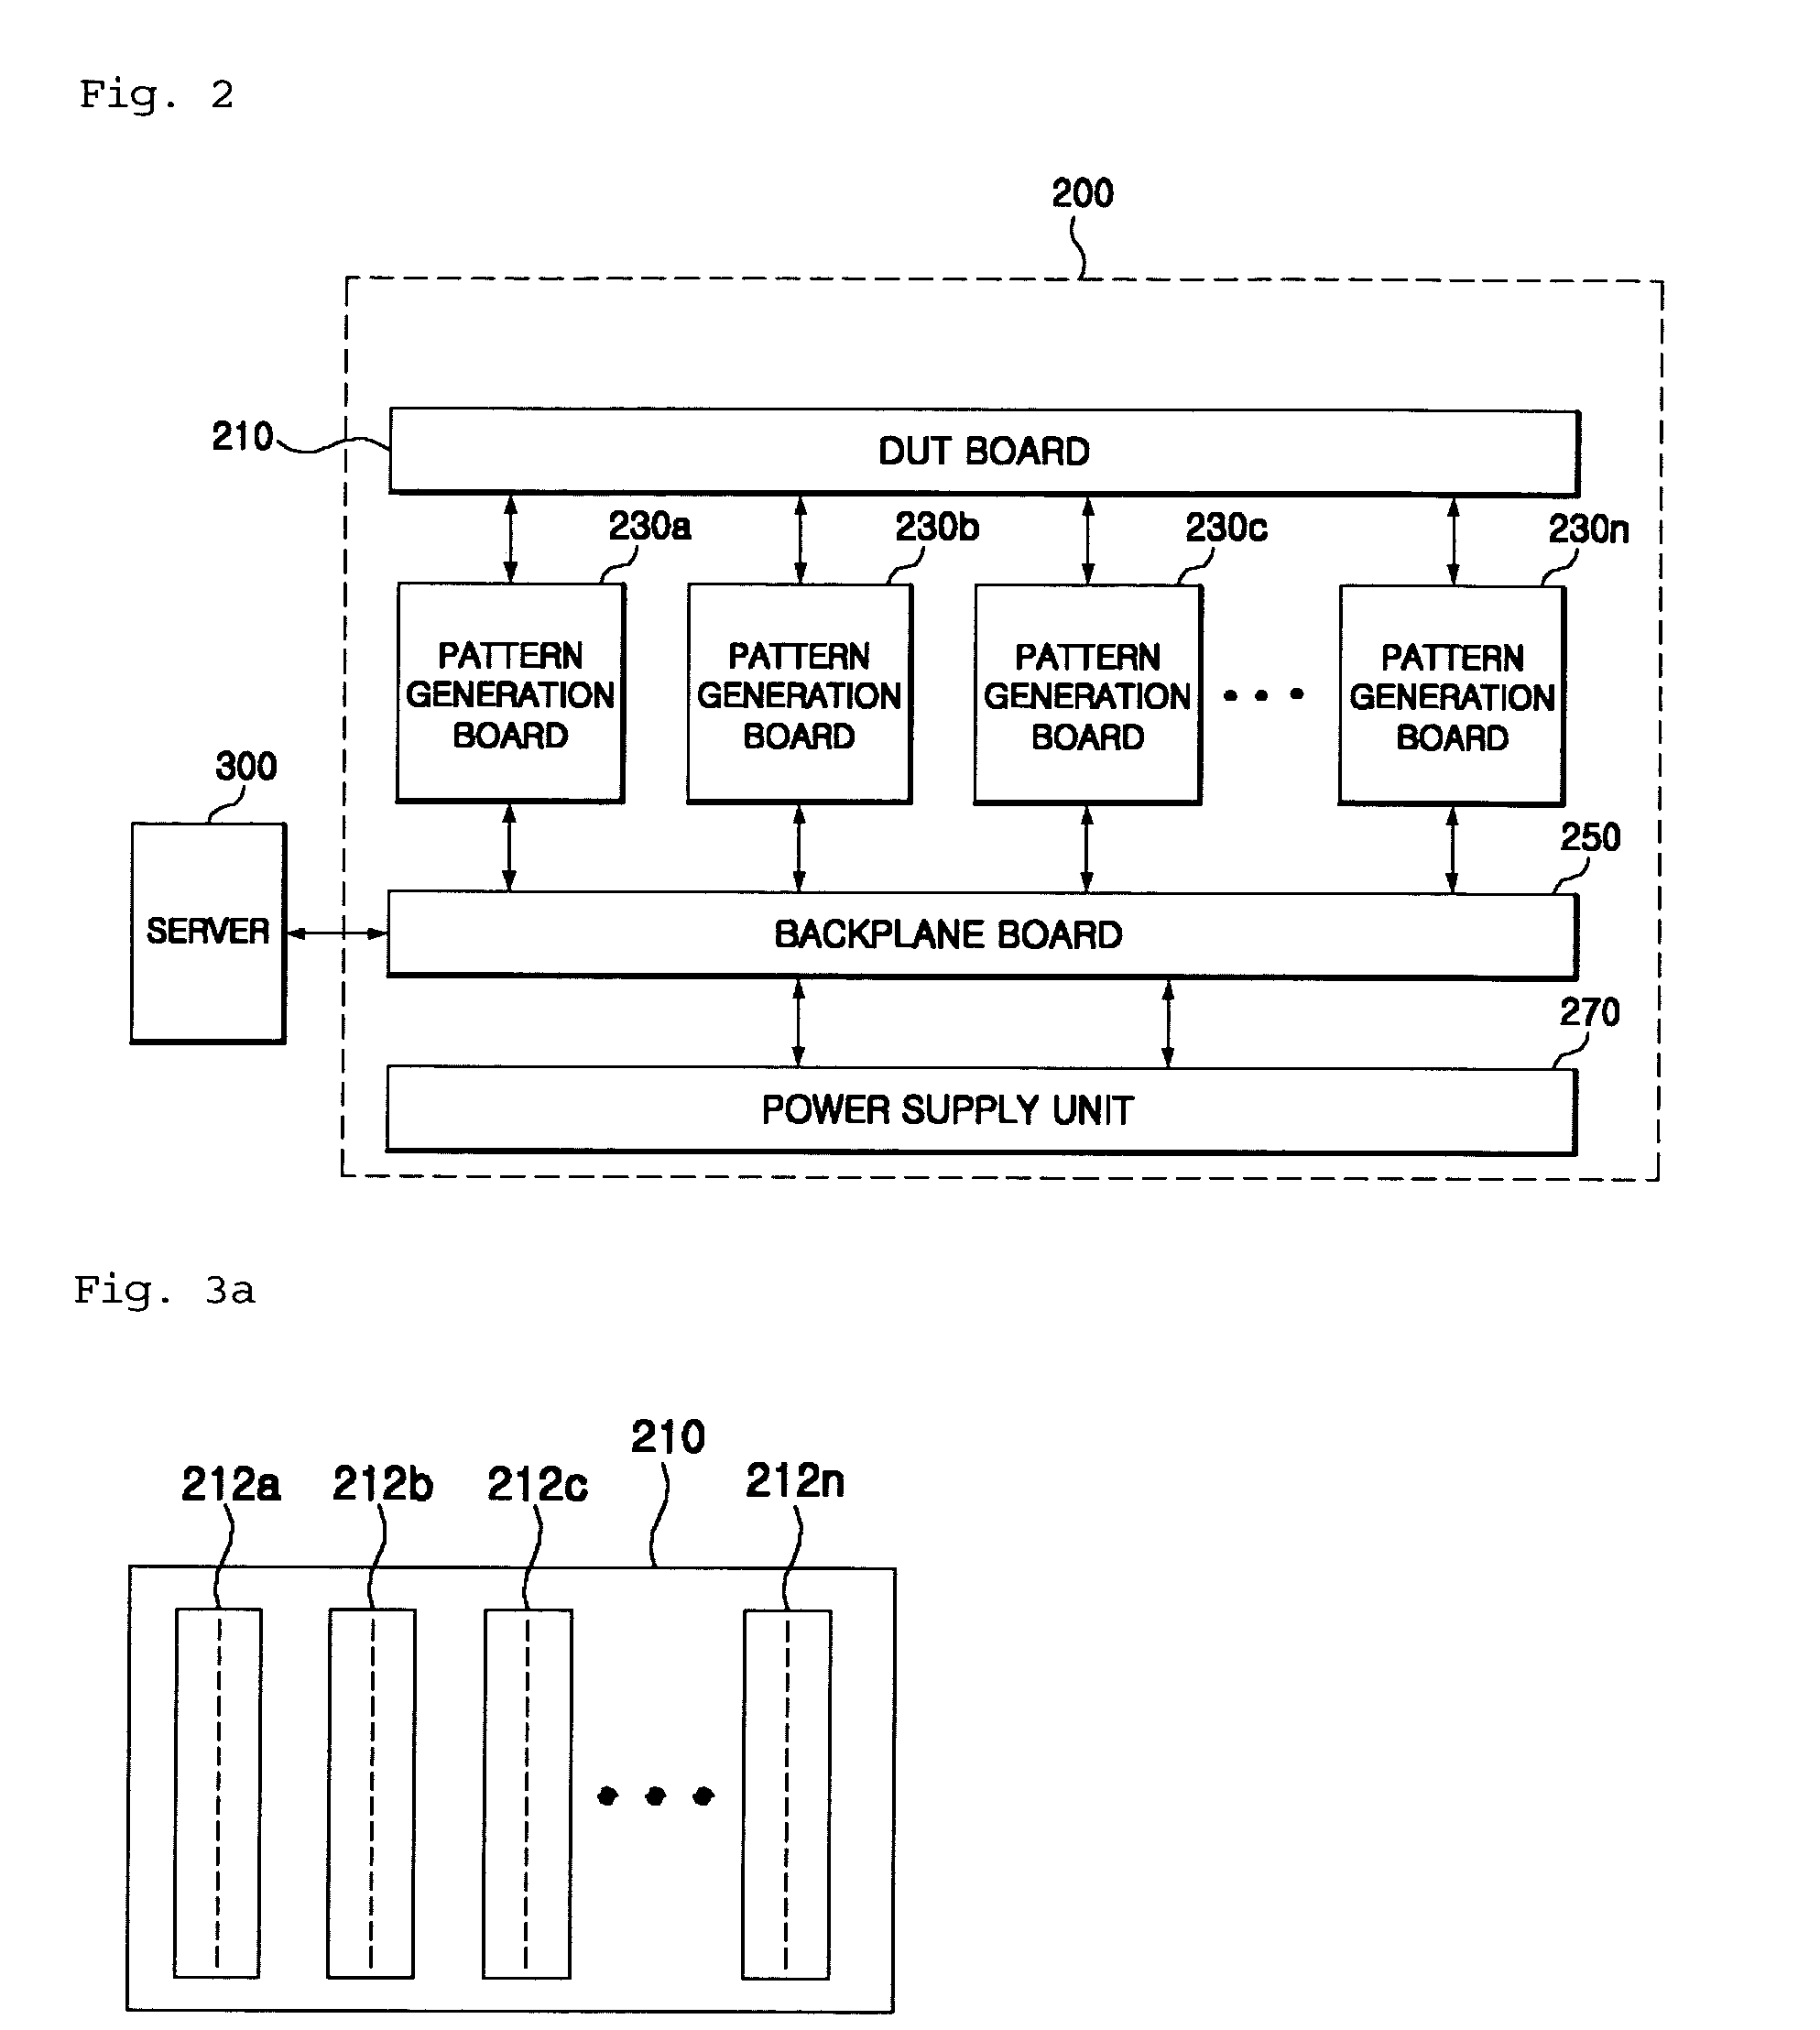 Semiconductor test apparatus for simultaneously testing plurality of semiconductor devices